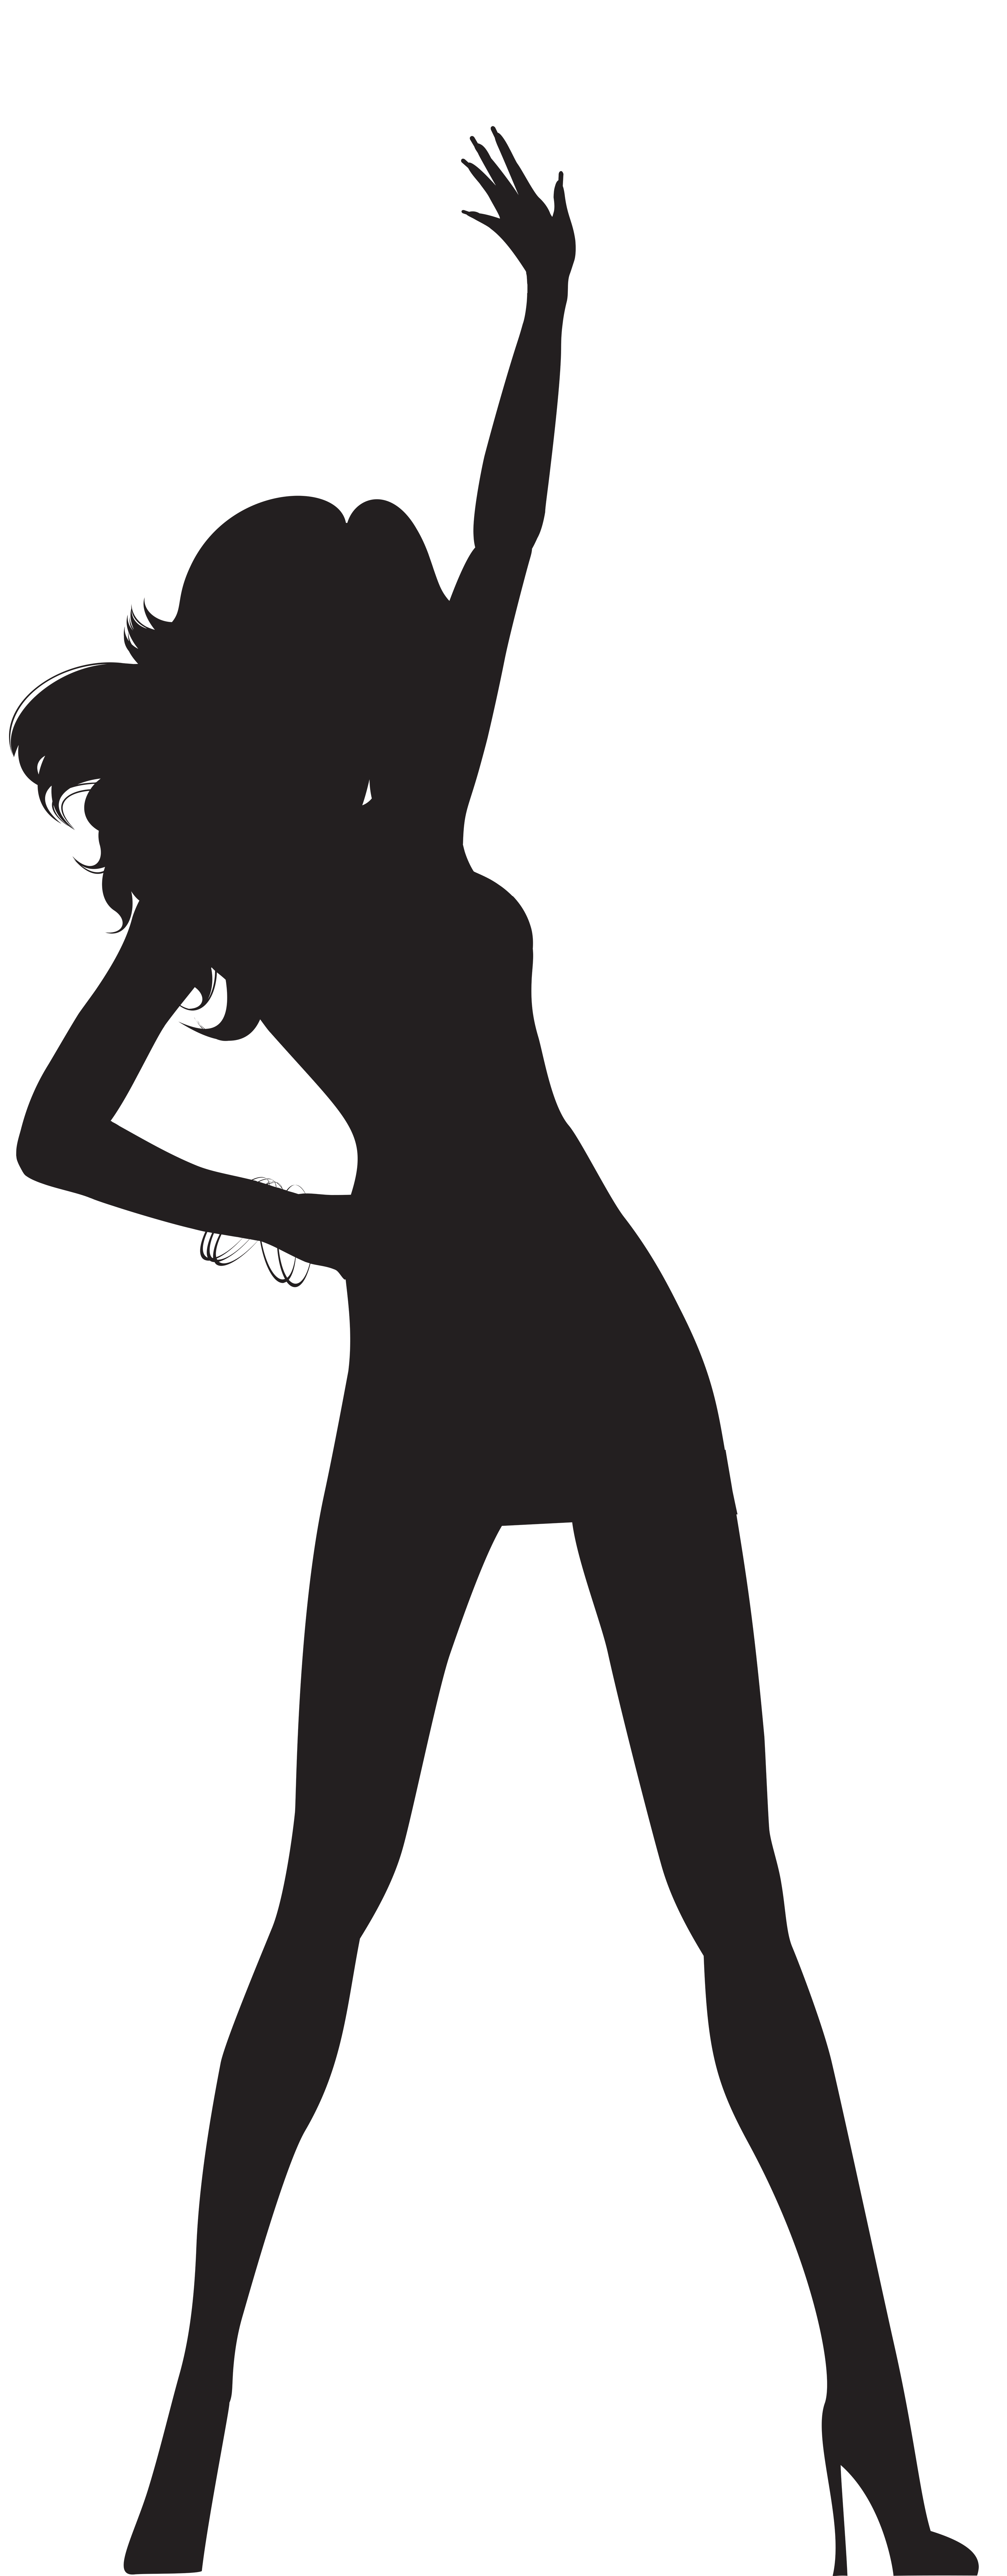 Dance Woman Silhouette Transparent Dancing HQ Image Free PNG Clipart